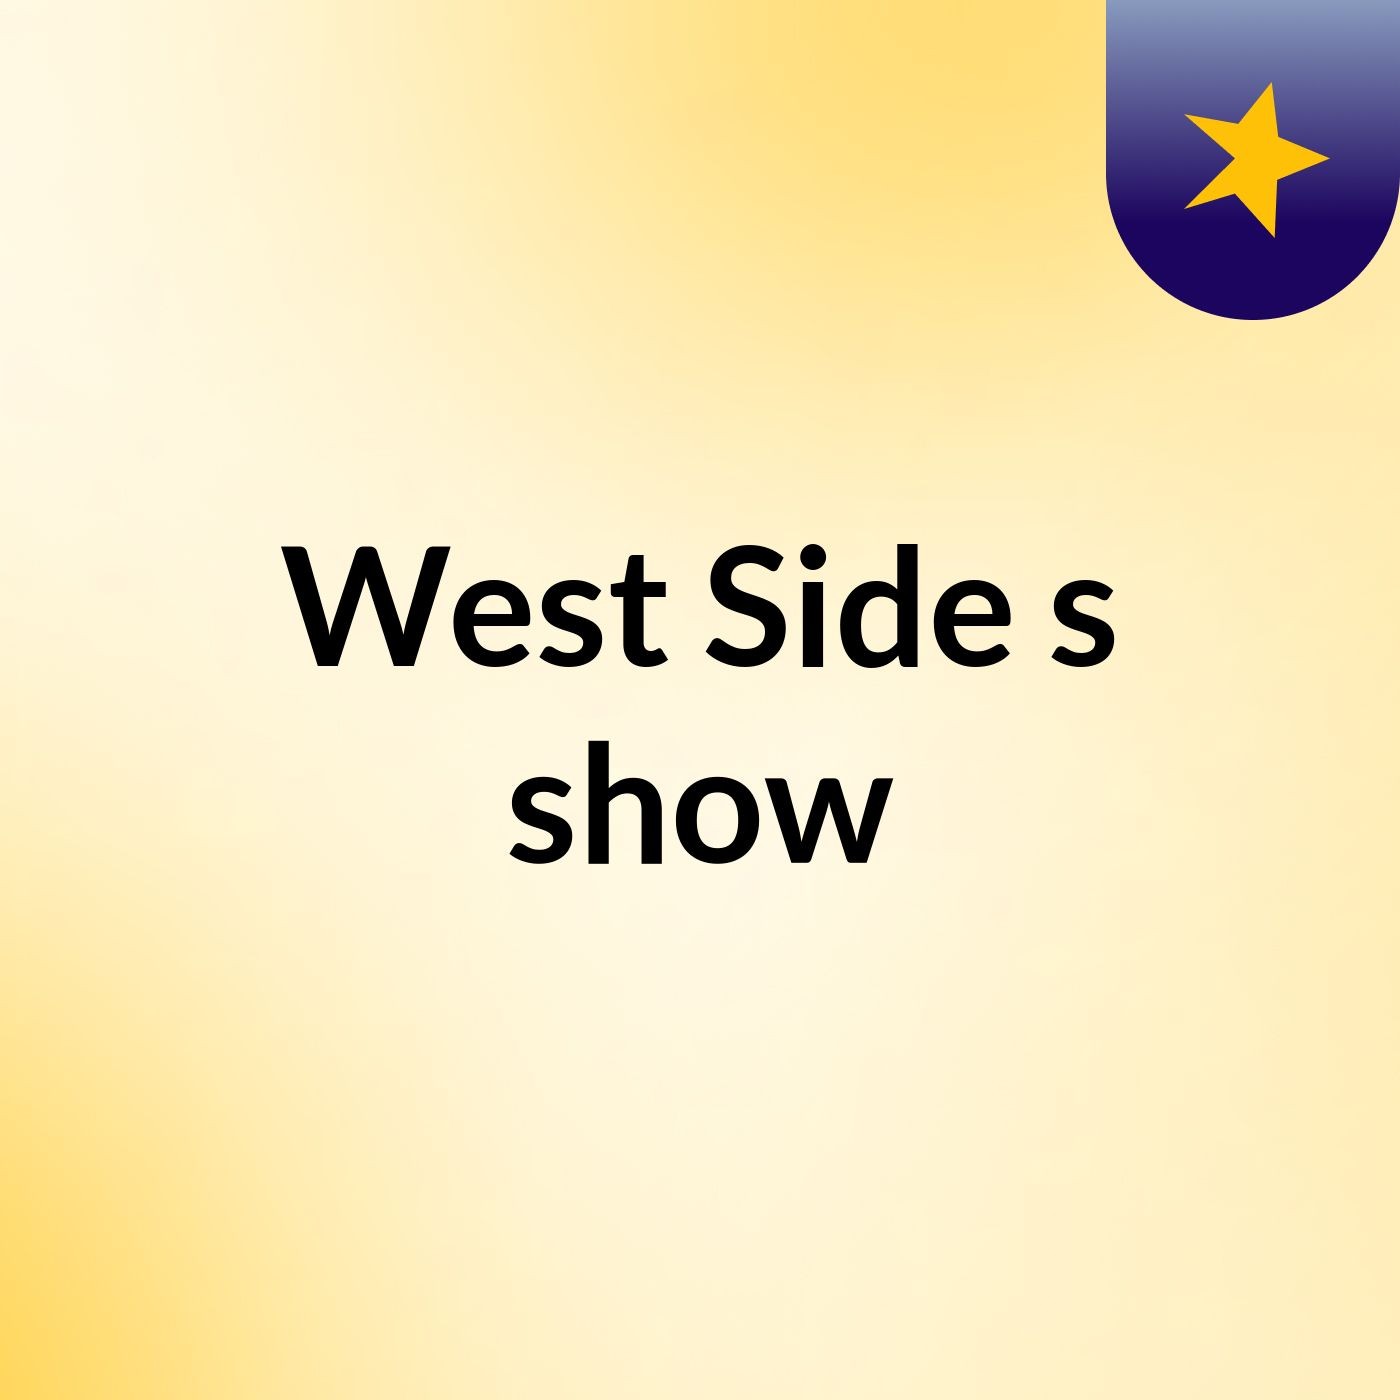 West Side's show